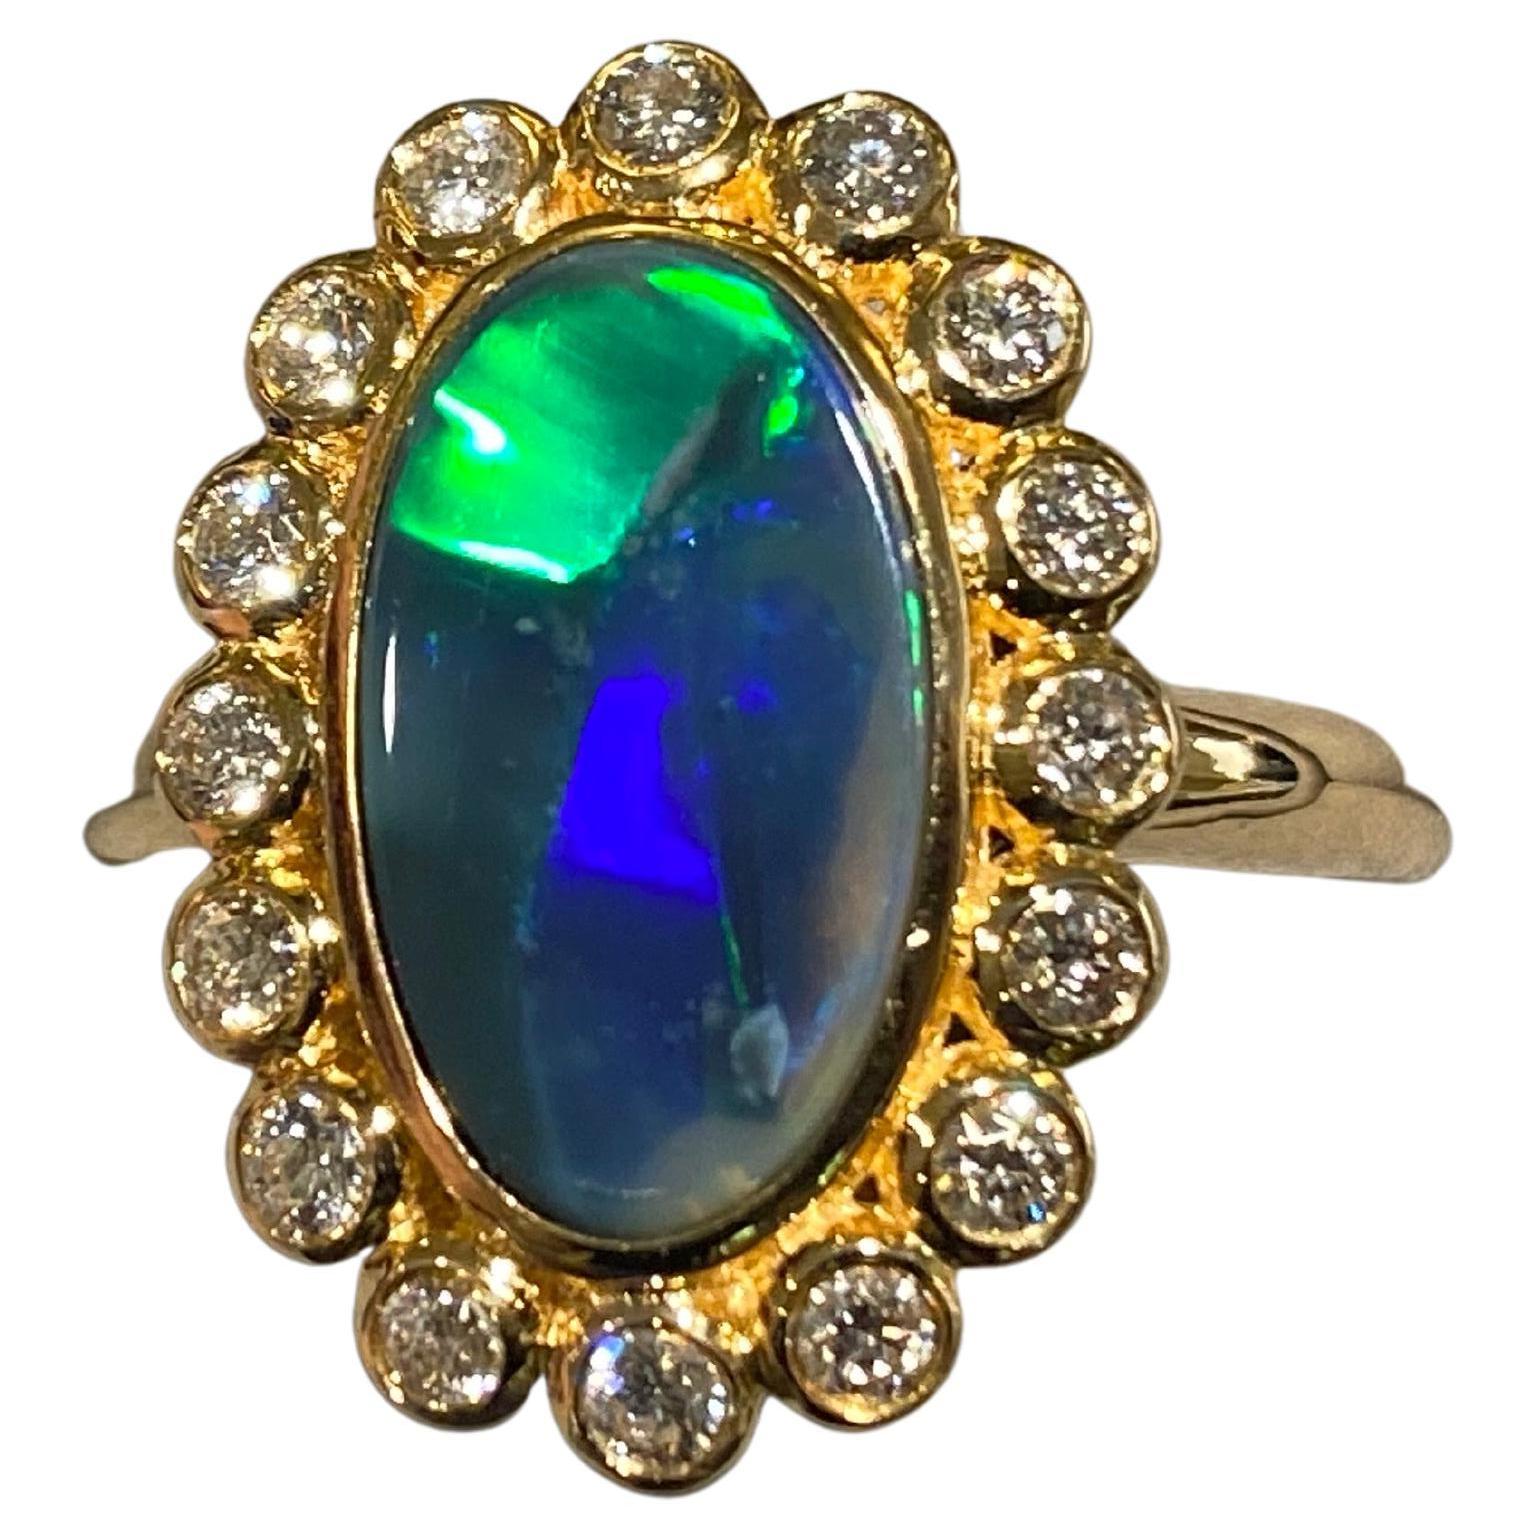 A  1.74 ct solid opal and diamond ring in 18k yellow gold. The opal is surrounded by a circle of diamond pave. This is the vintage cluster ring design and it is an old time favorite of many. The main colour of the opal is green with a few patches of